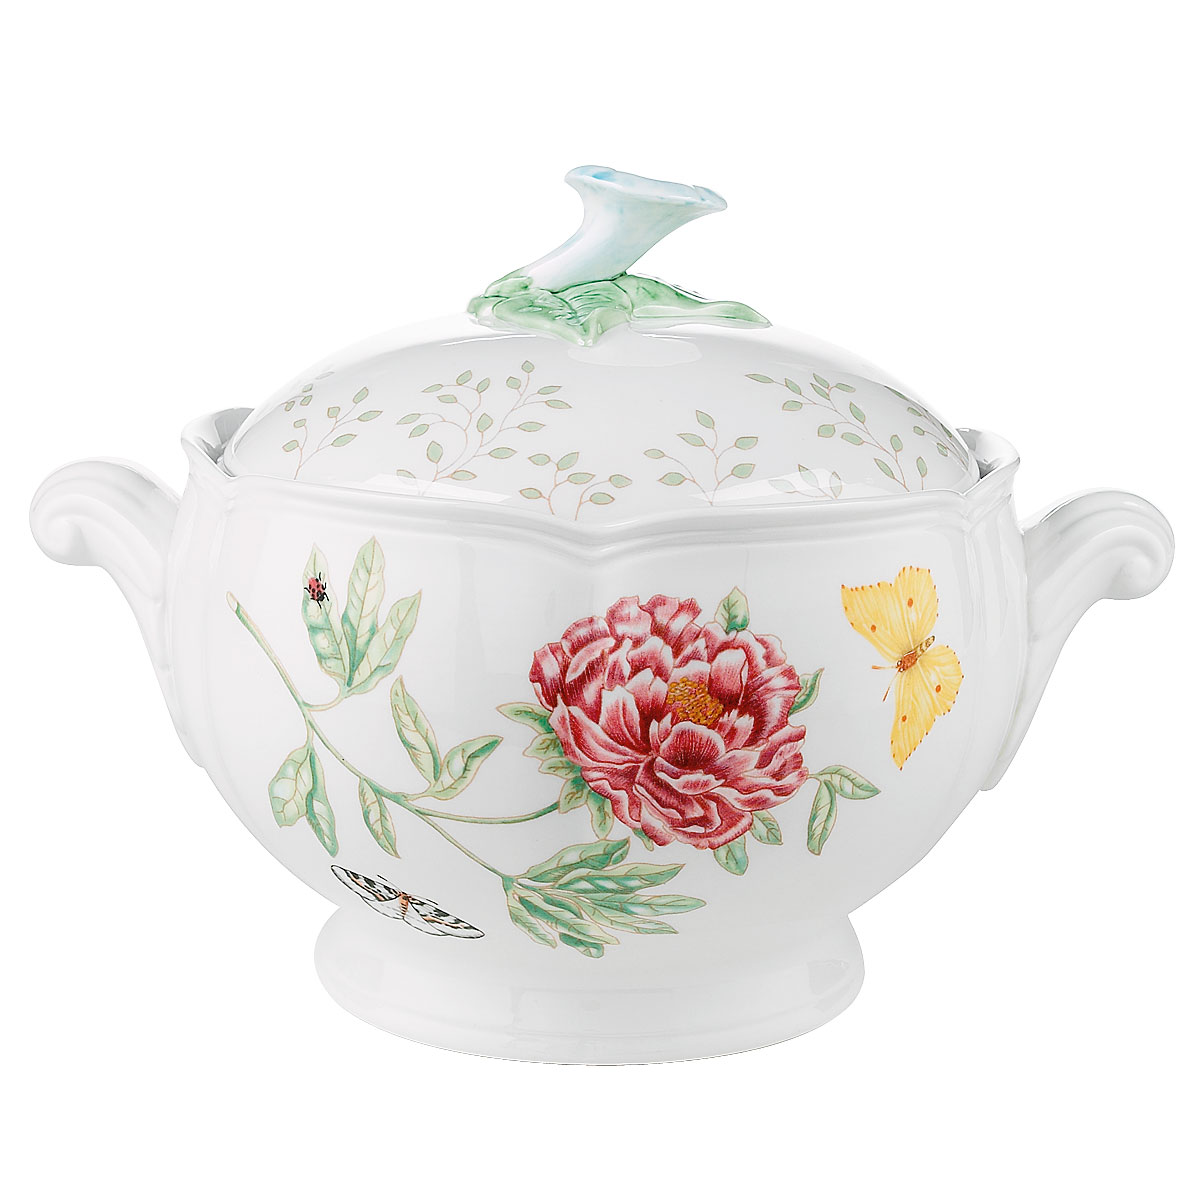 Lenox Butterfly Meadow China Covered Casserole